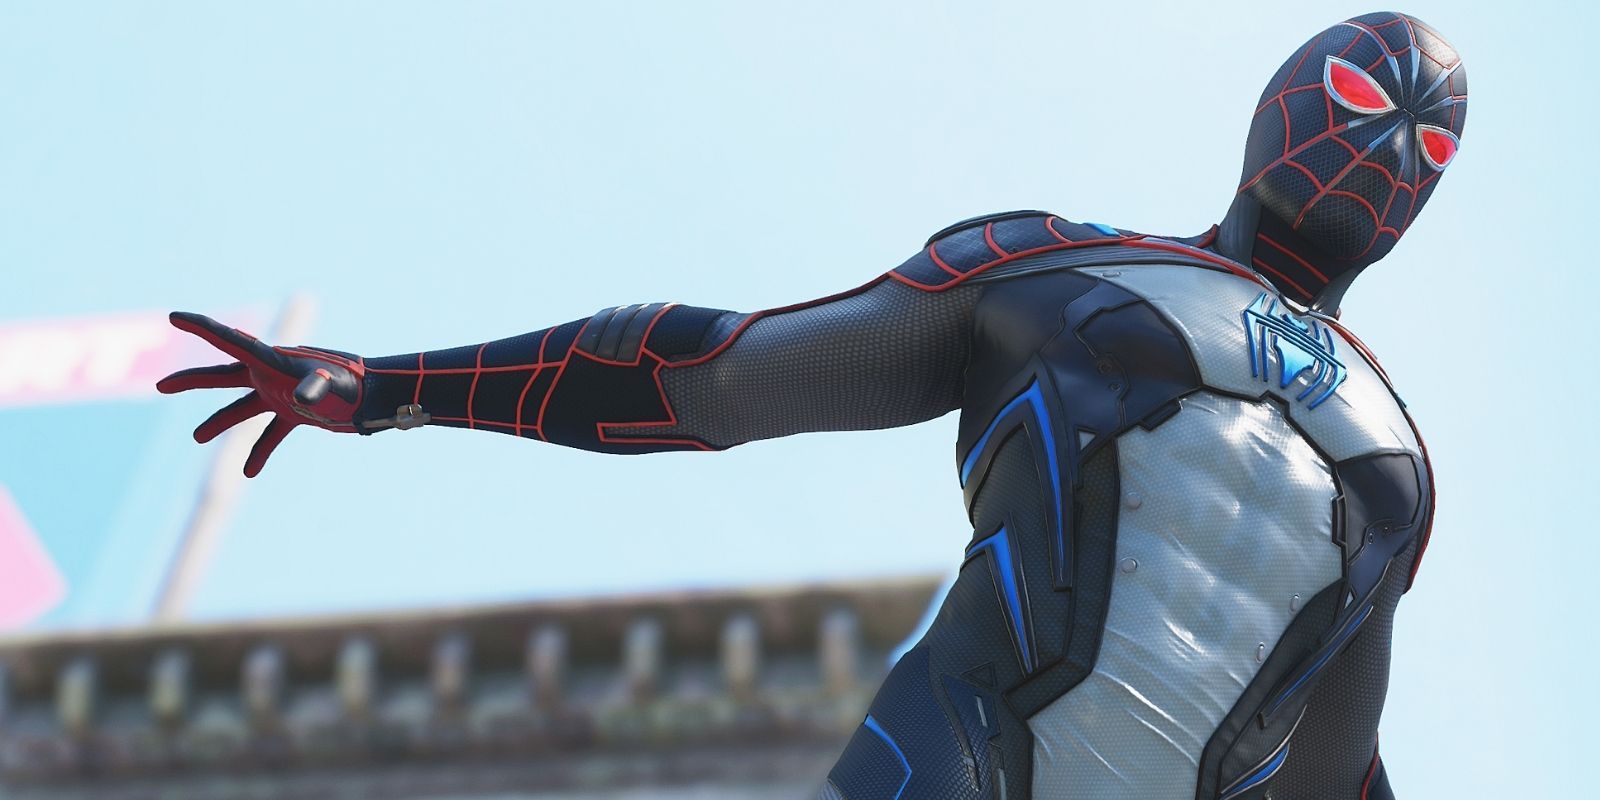 Spider-Man in his Secret Wars outfit as seen in Marvel's Avengers